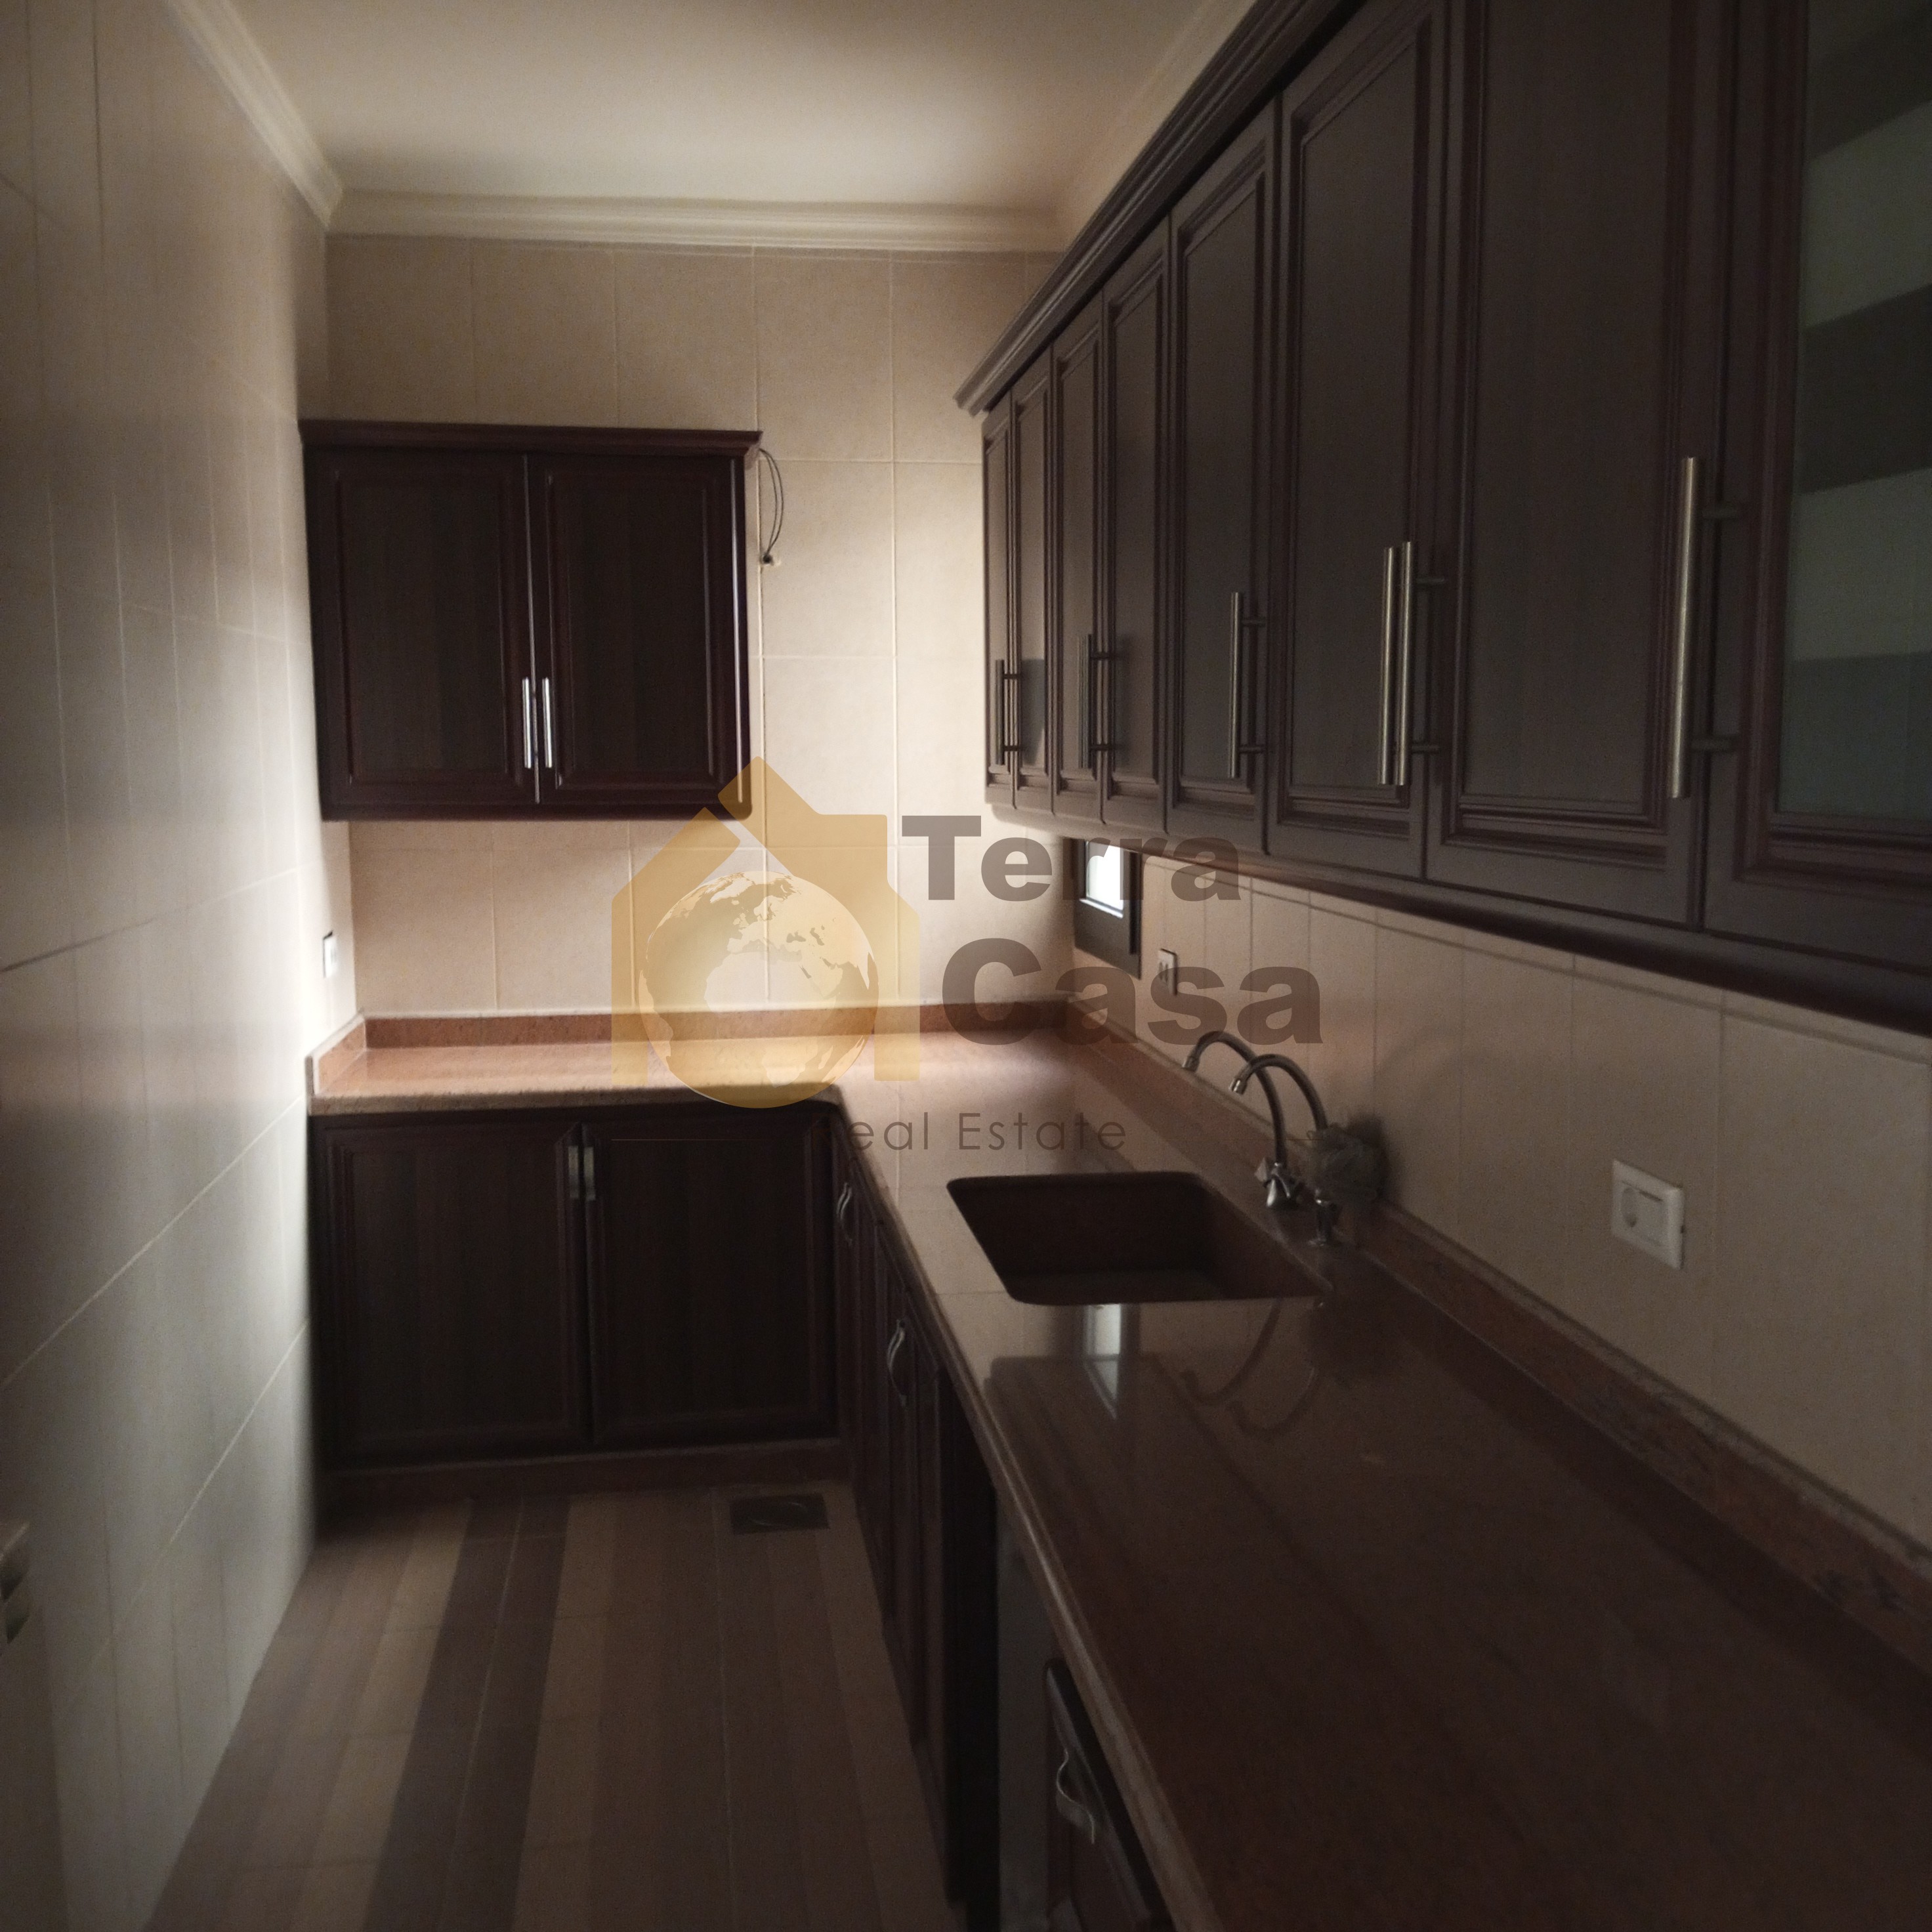 Kabelias brand new 2 bedrooms apartment for sale